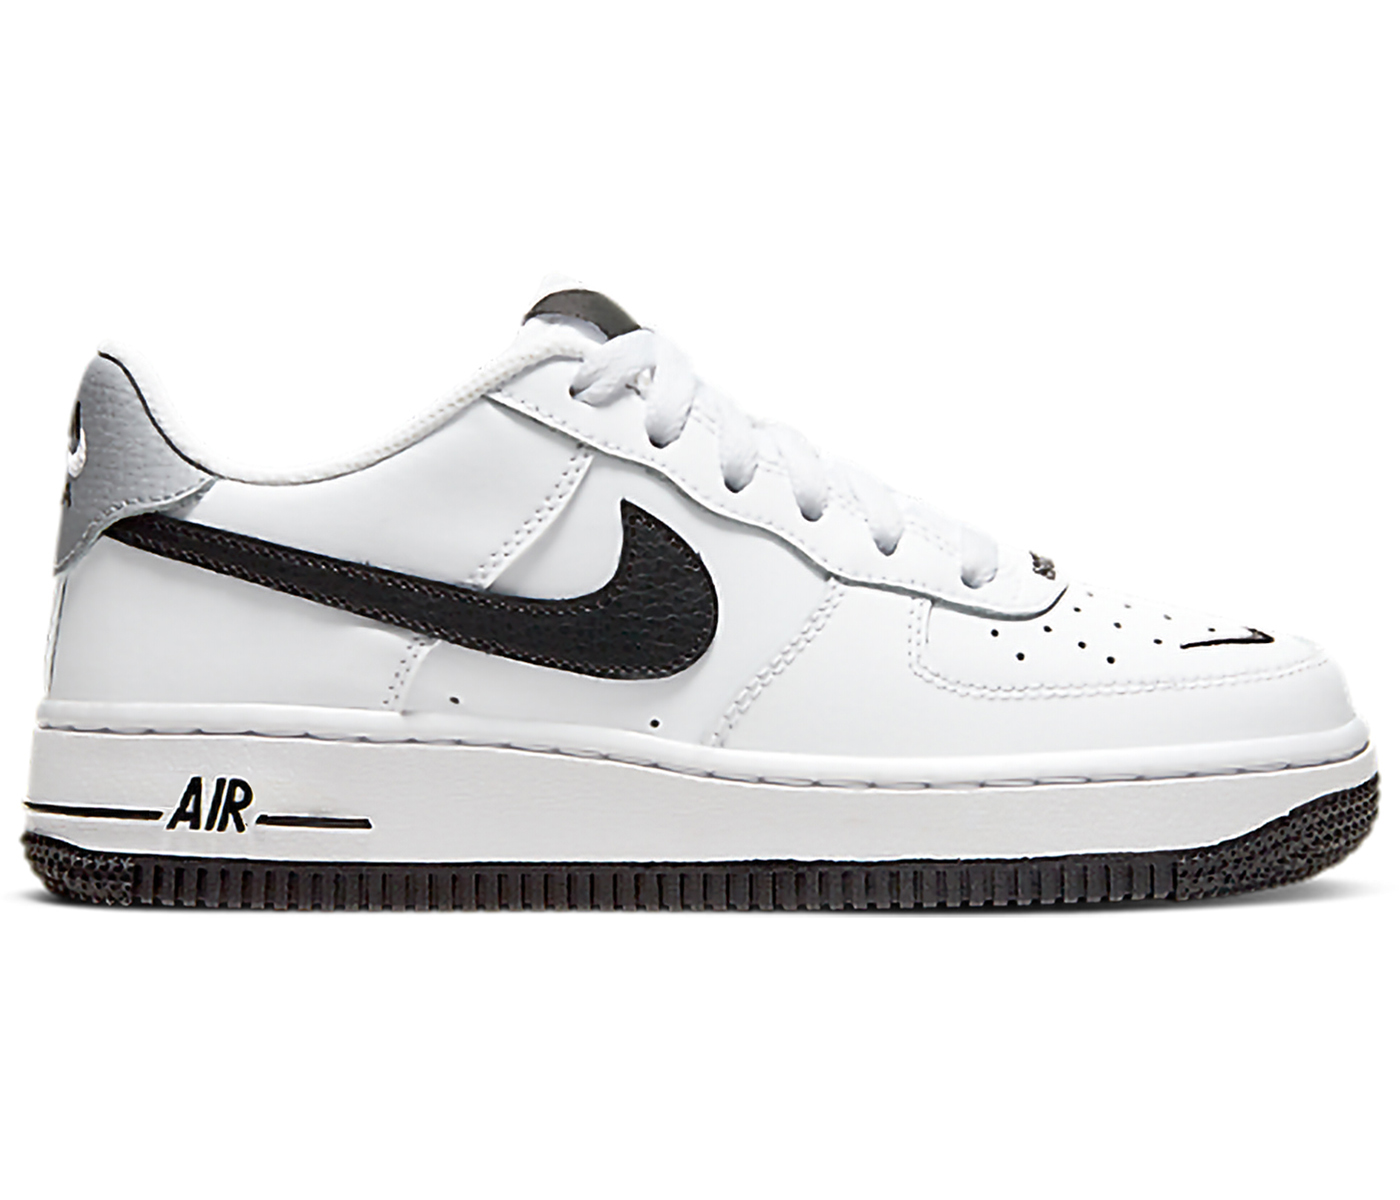 Nike GS Air Force 1 Low "Daisy"ナイキ GS